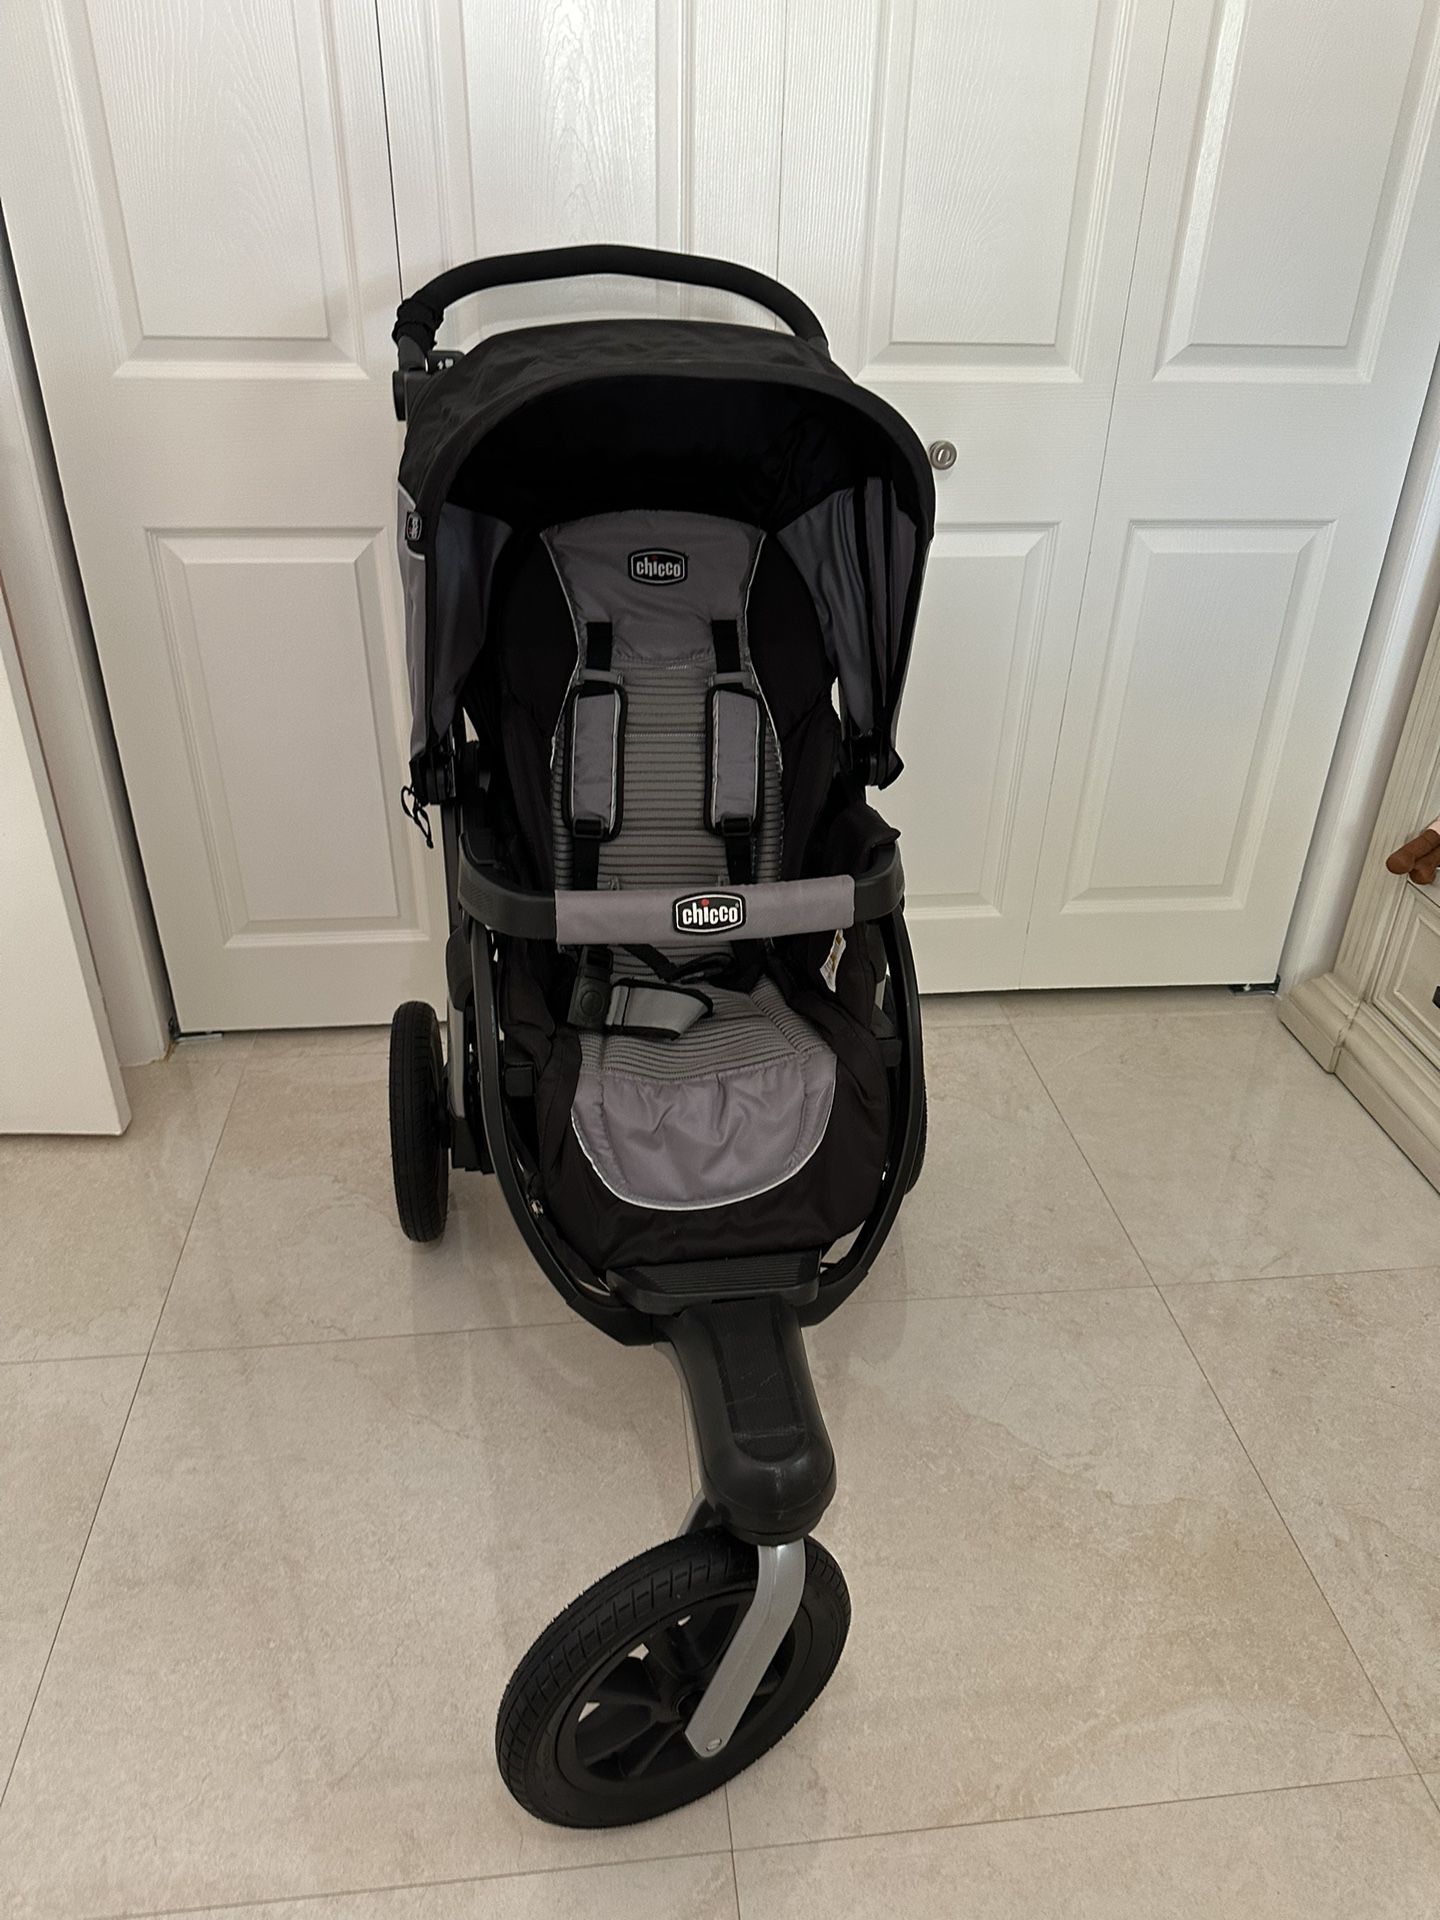 Chicco Active Jogging Stroller Like New Condition